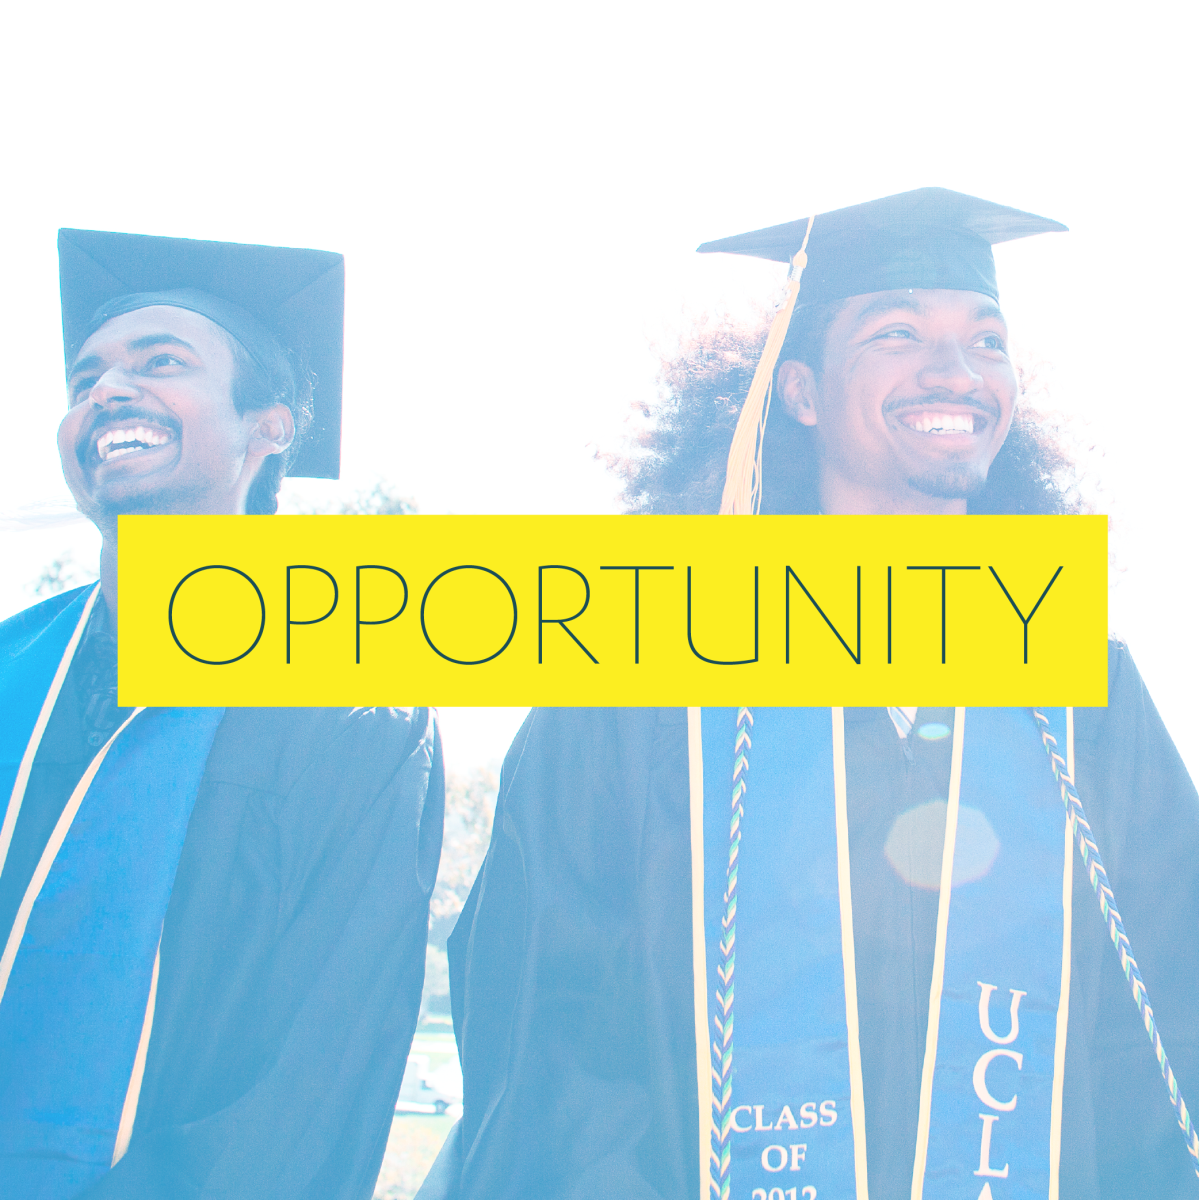 Click here to learn more about the resources and opportunities at UCLA